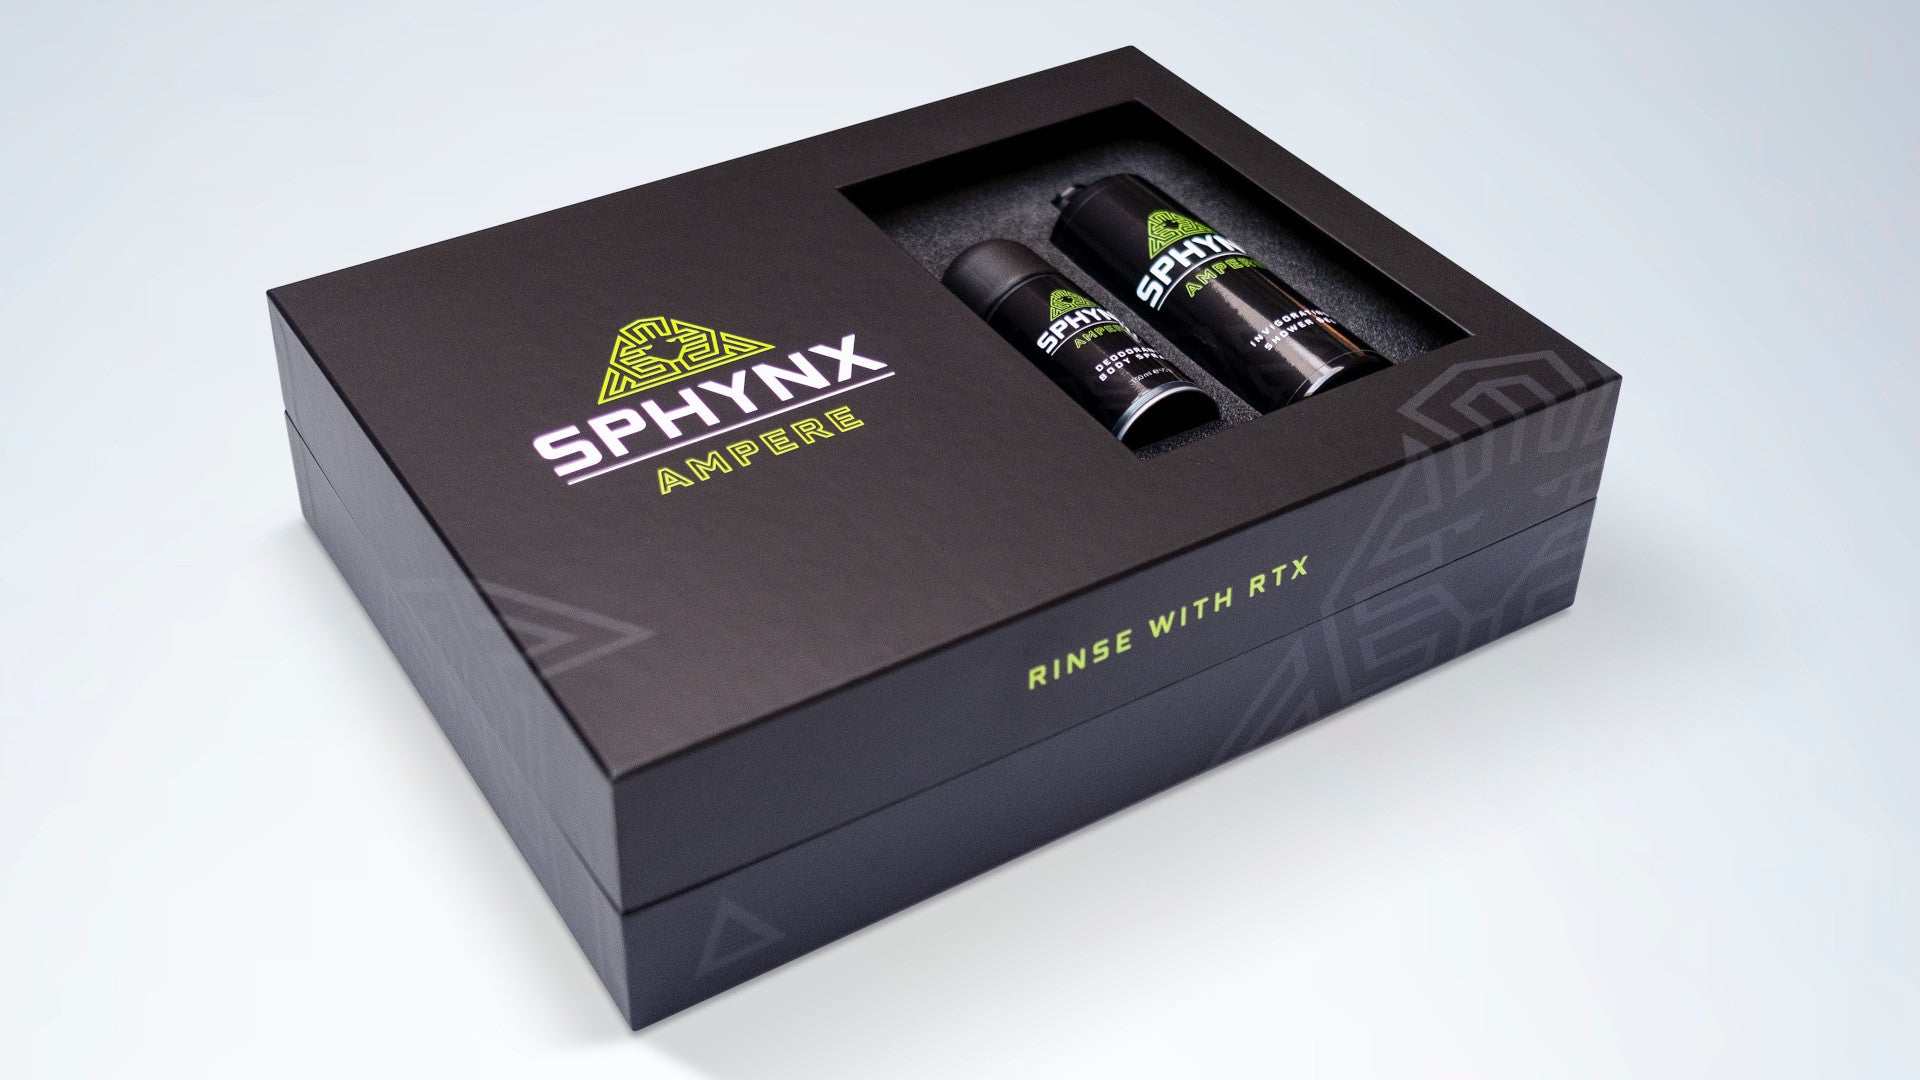 A photo of Nvidia Sphynx Ampere-branded deodorant and shower gel.